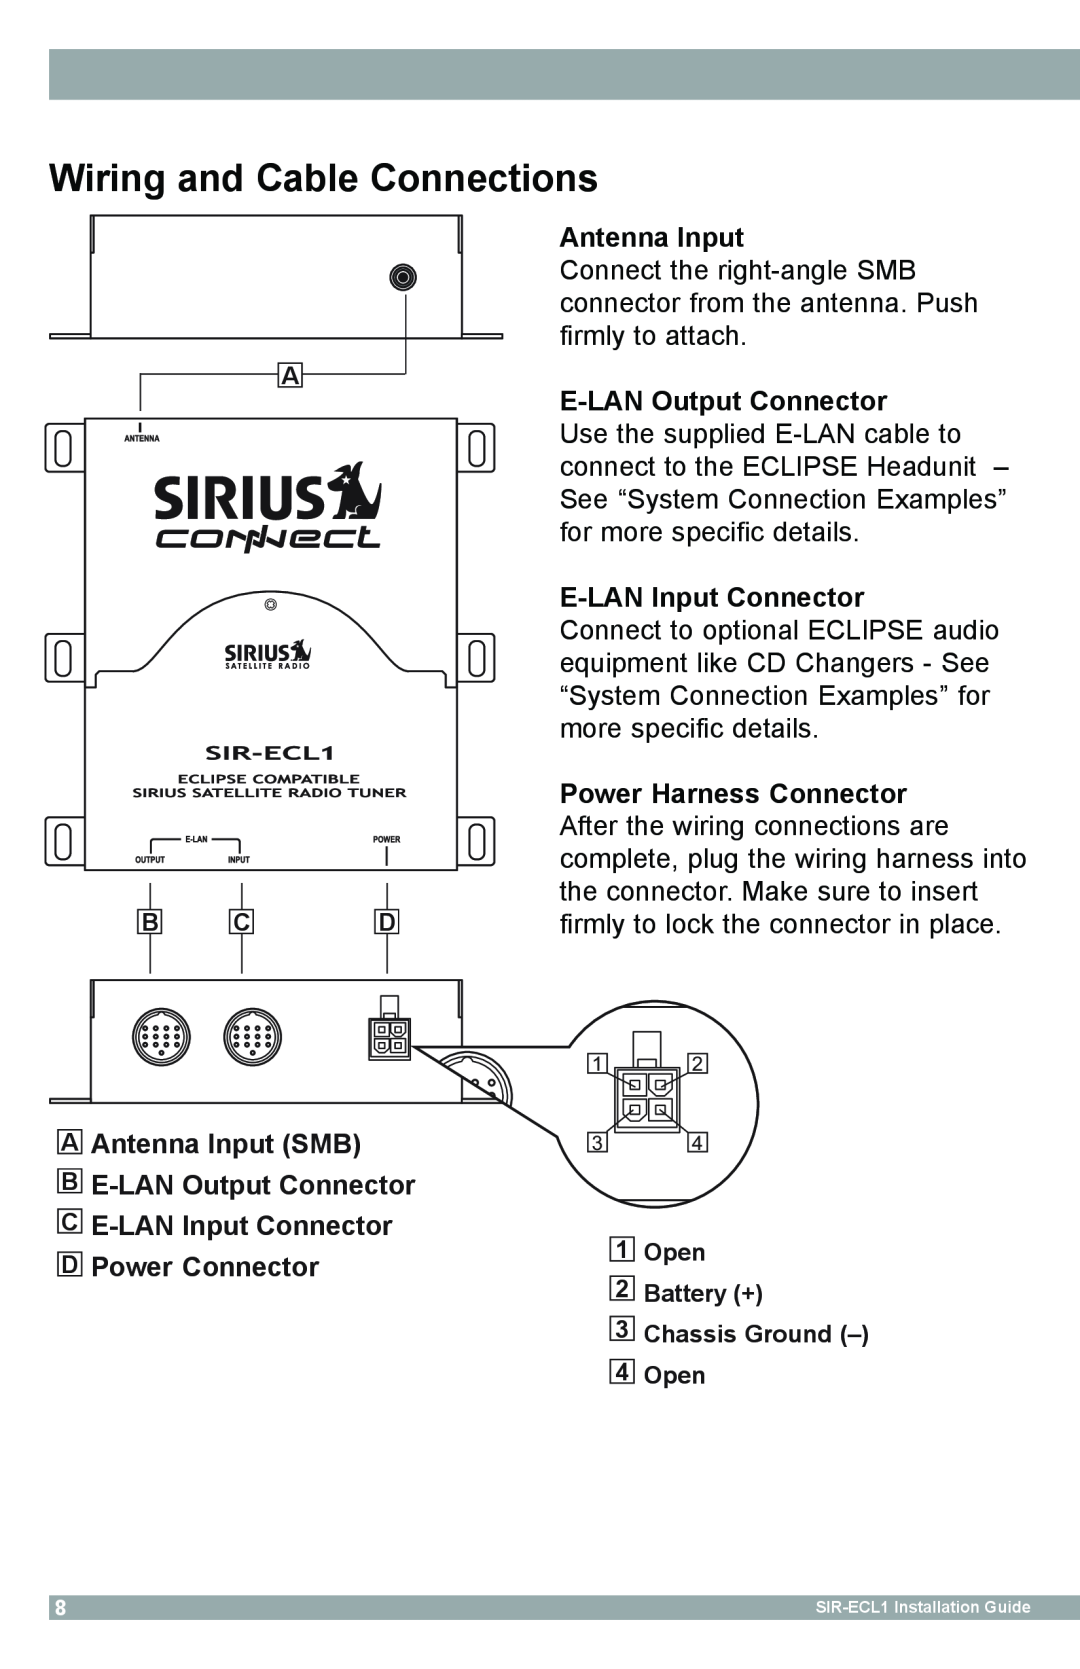 Sirius Satellite Radio SIR-ECL1 manual Wiring and Cable Connections 